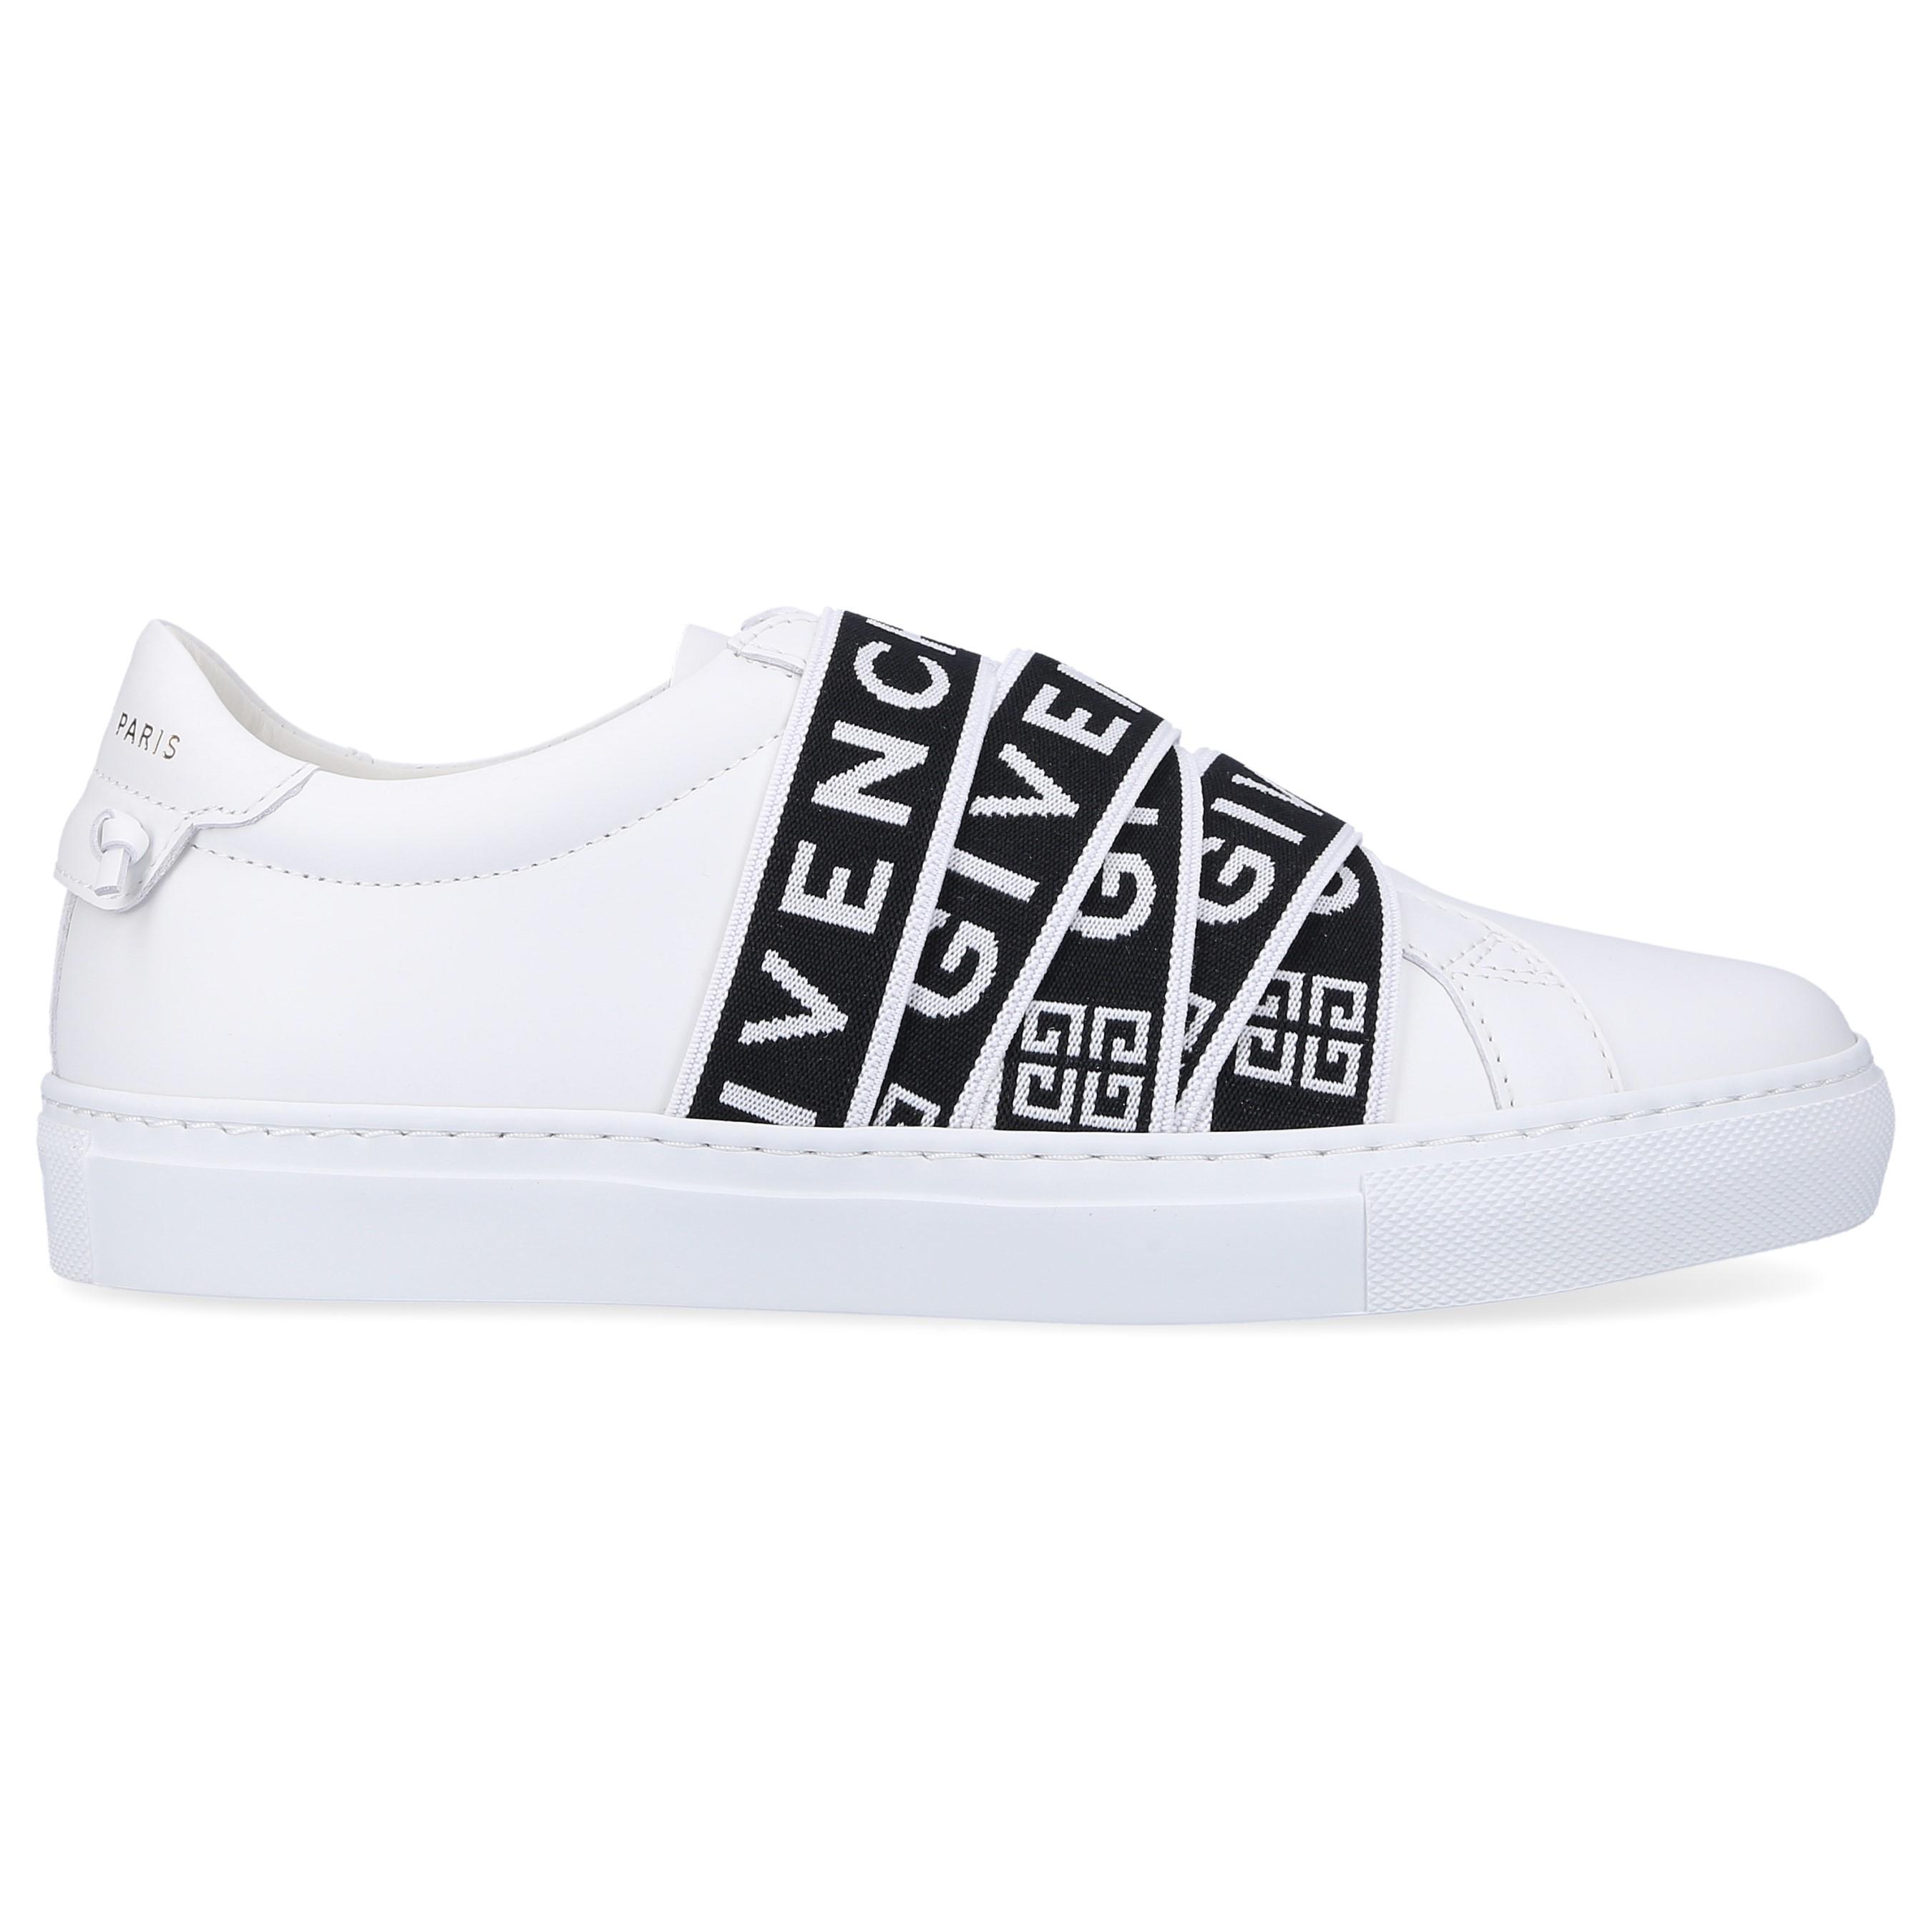 Givenchy Leather 4g Webbing Sneakers Black White - Lyst